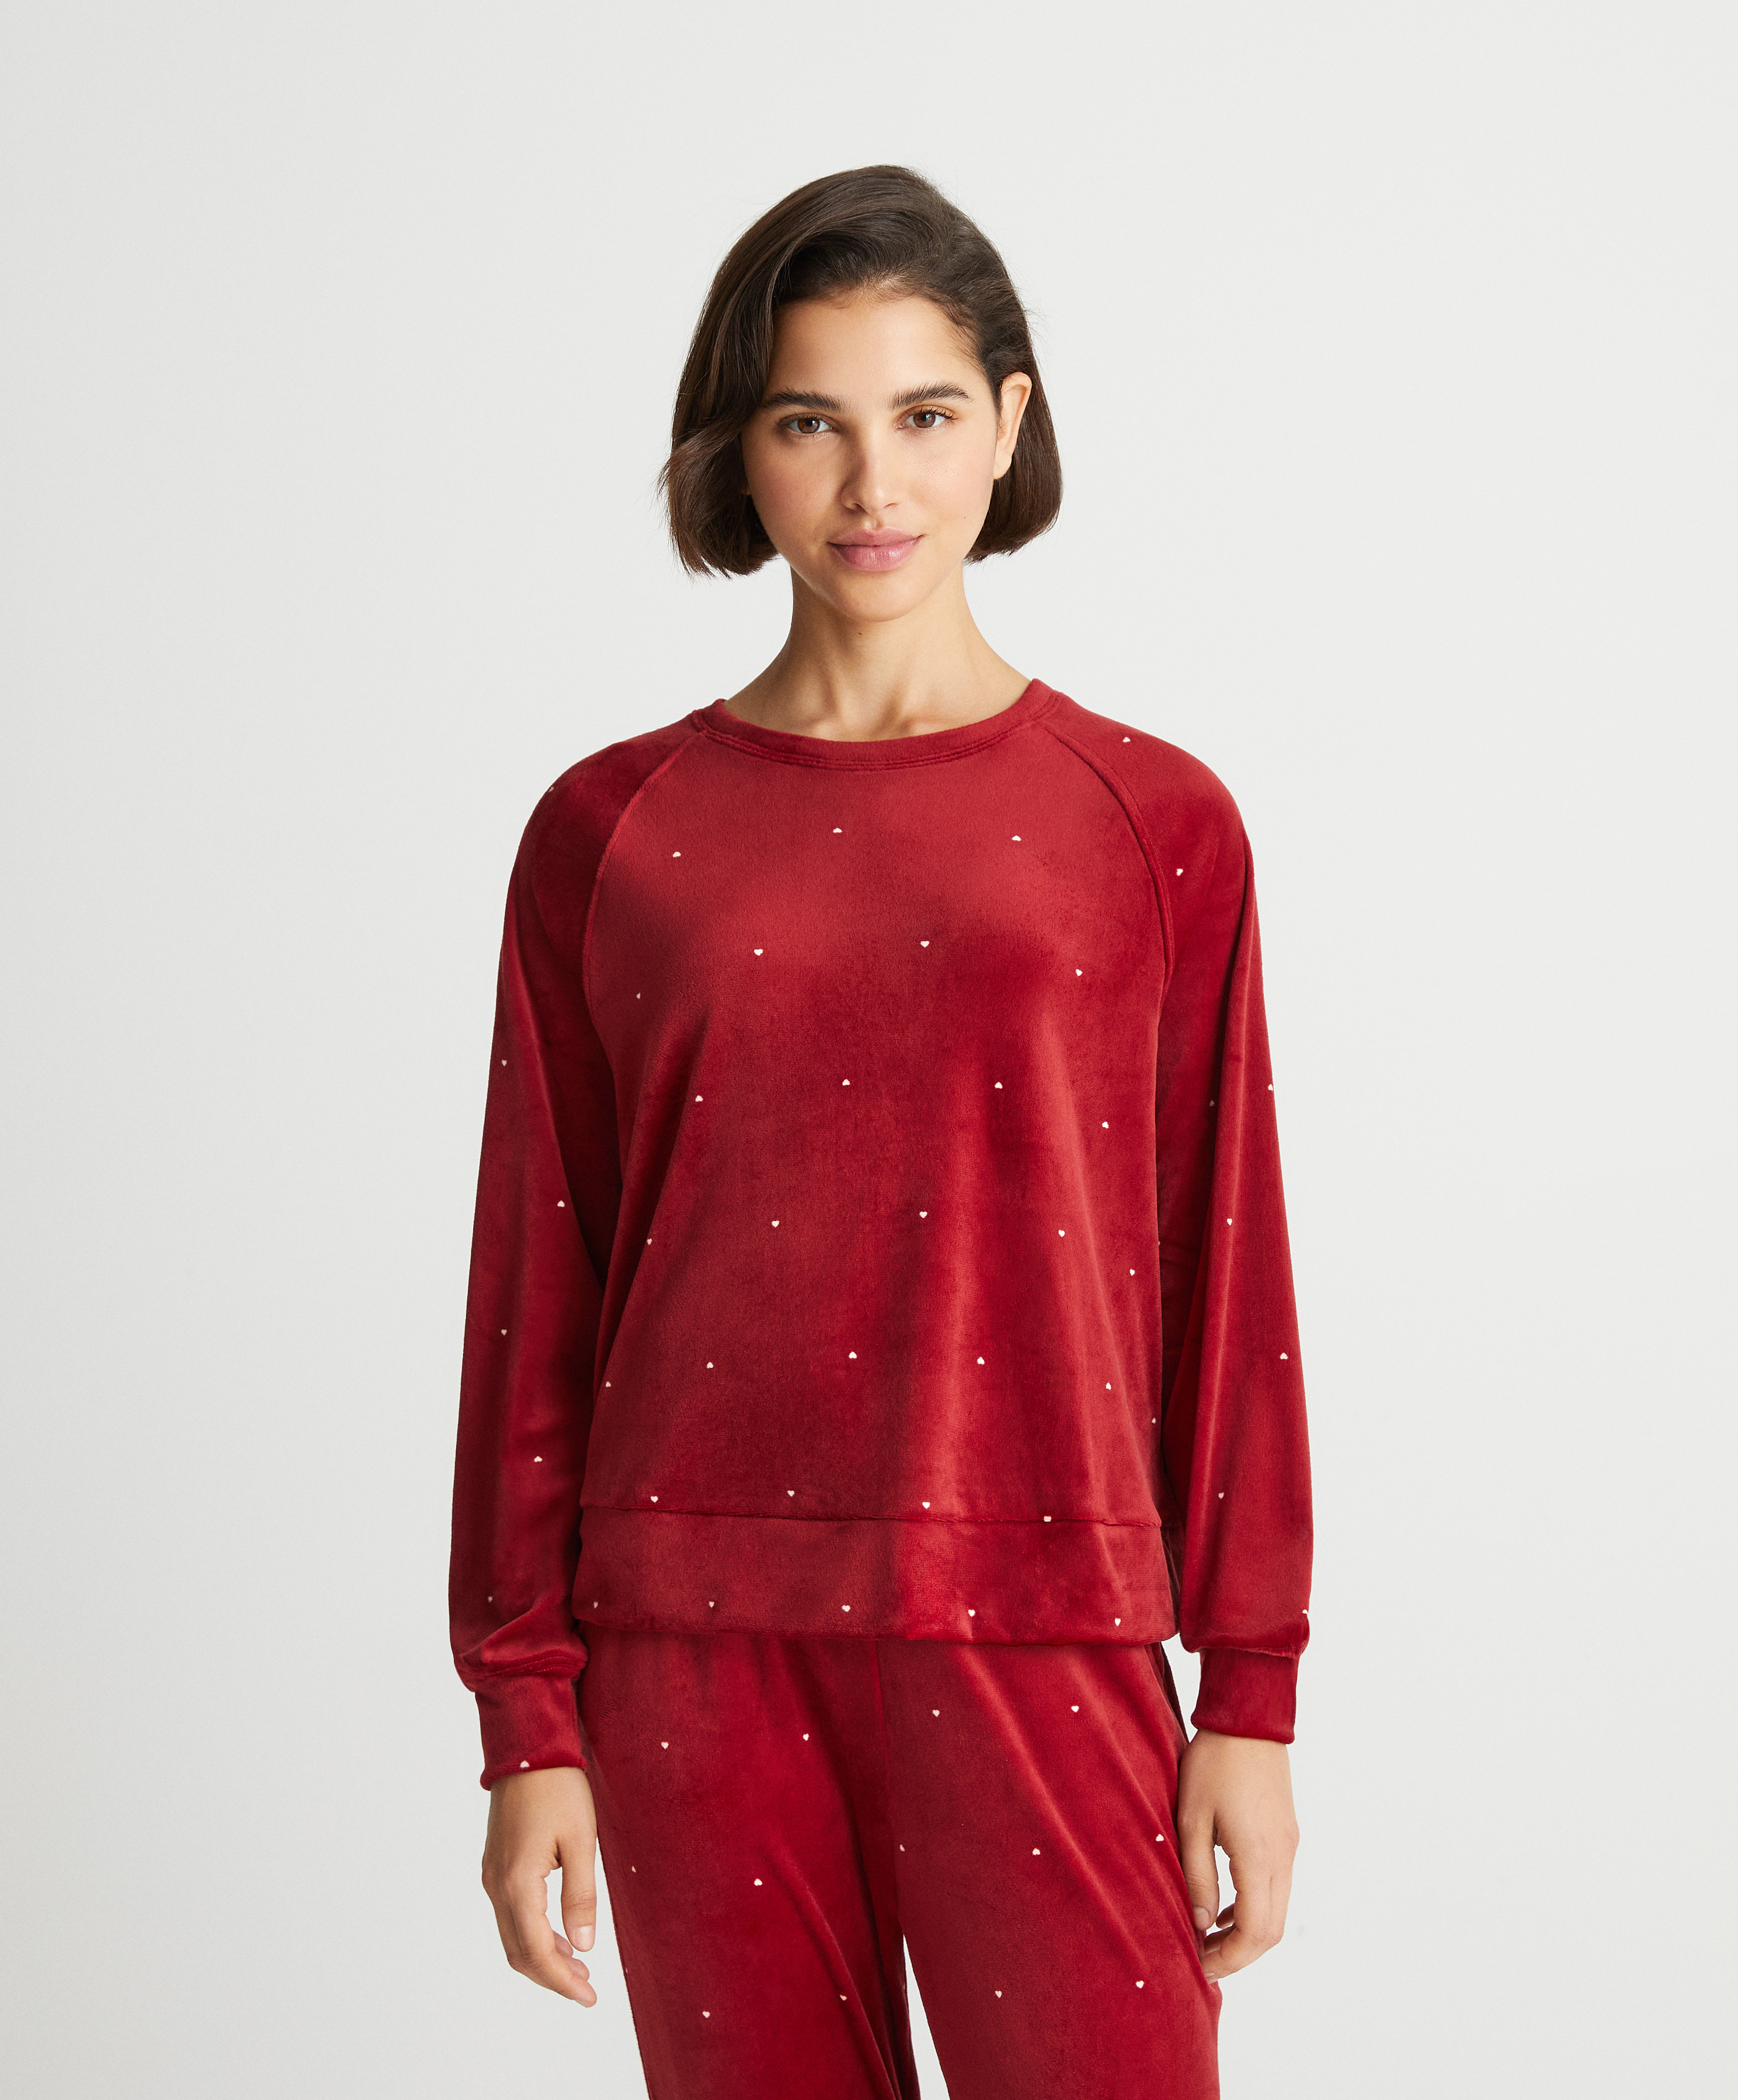 Velour and stars long-sleeved top